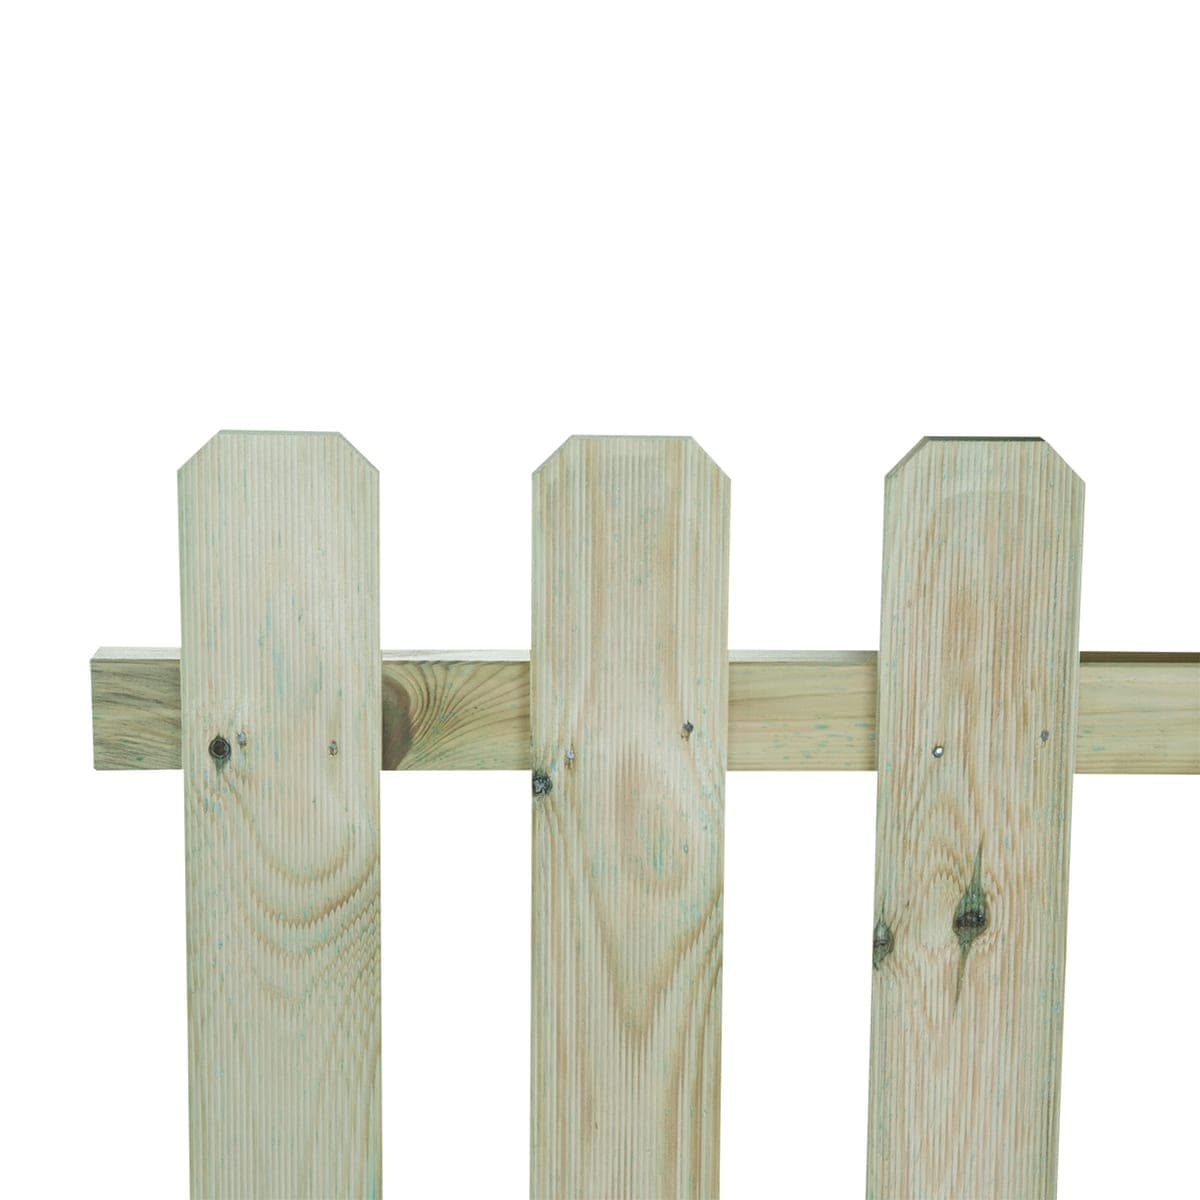 STRAIGHT FENCE 180 X H 70 CM MADE OF AUTOCLAVE-TREATED PINE WOOD